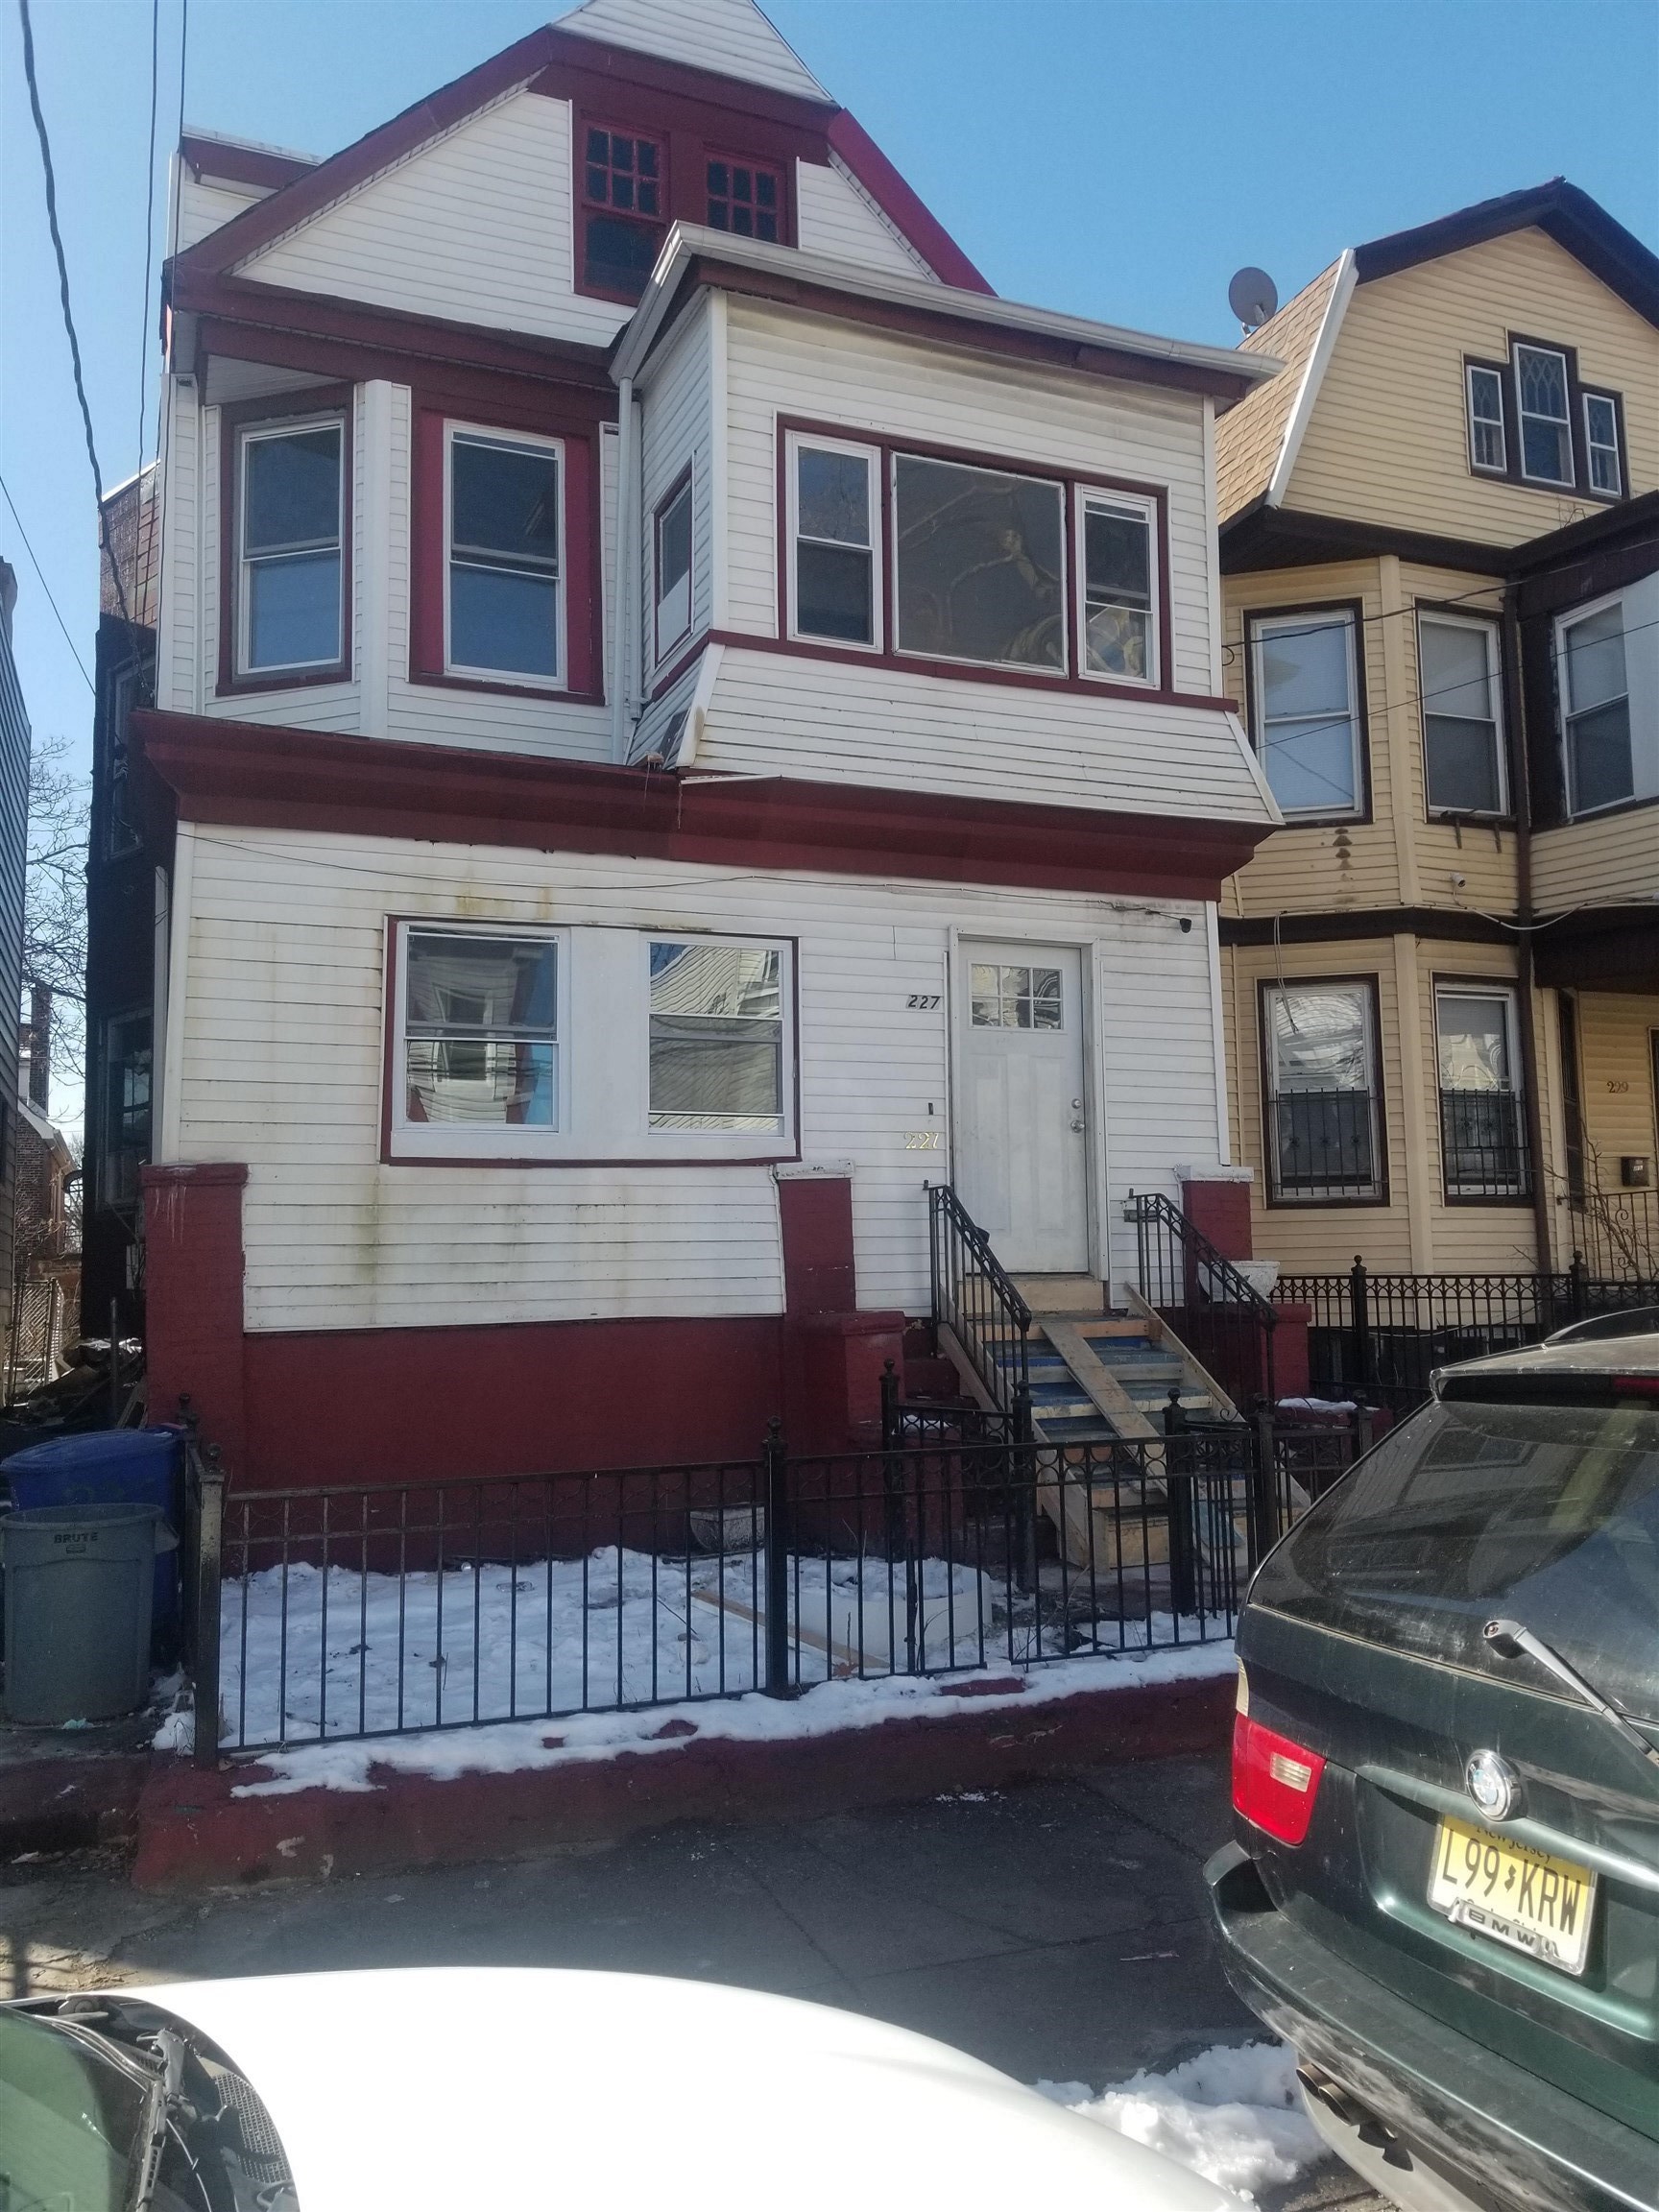 # 240003556 - For Rent in JERSEY CITY - Greenville NJ